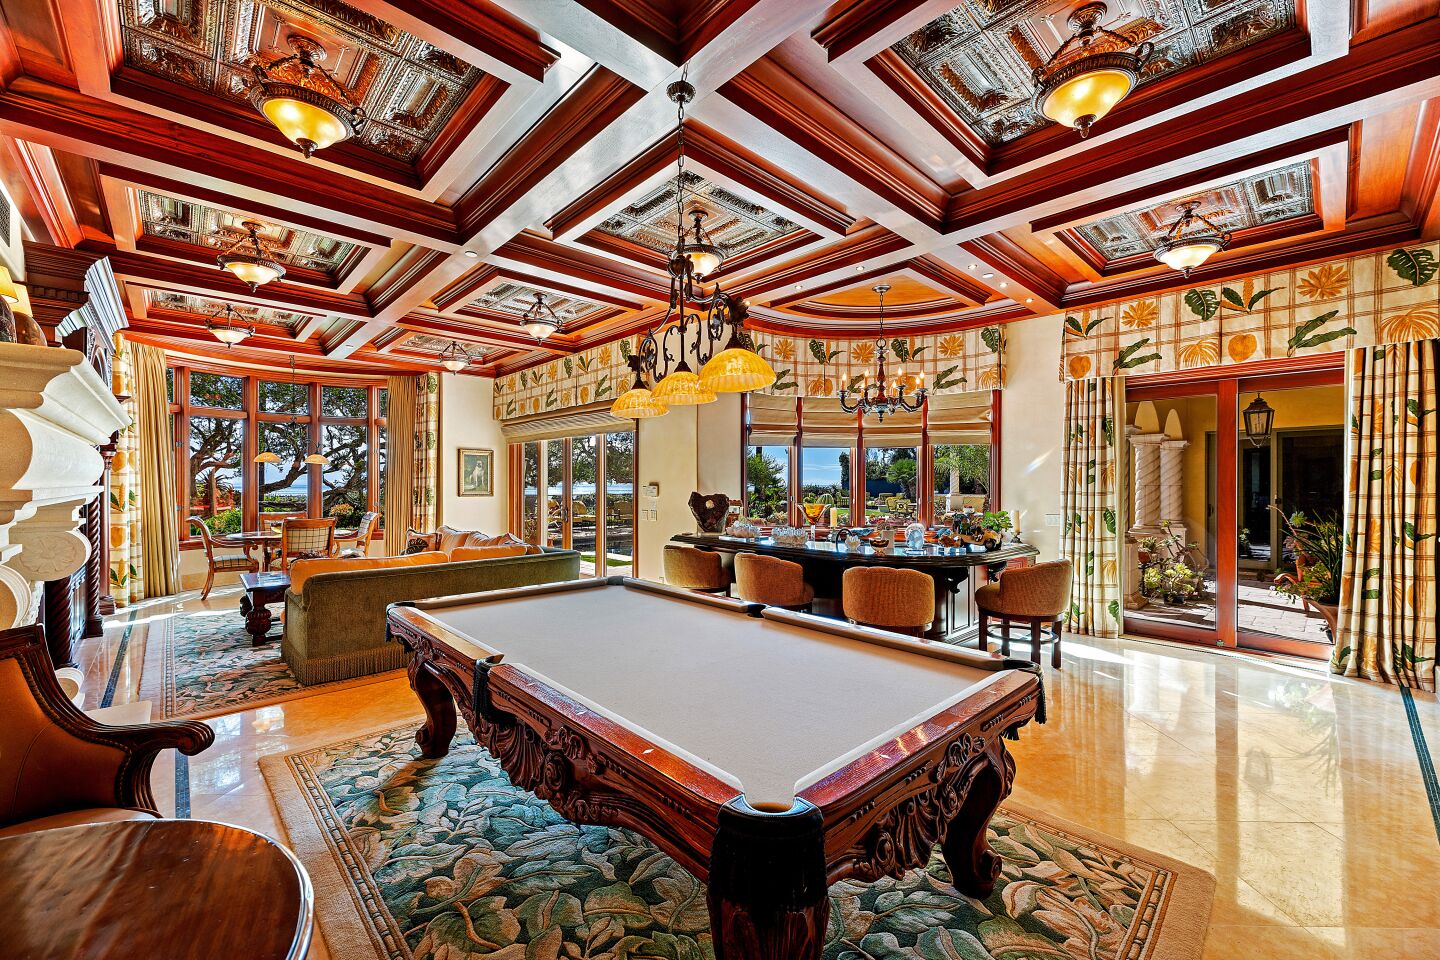 Billiards table, dark wood coffered ceiling, marble floors and a curved bar in the billiards room.